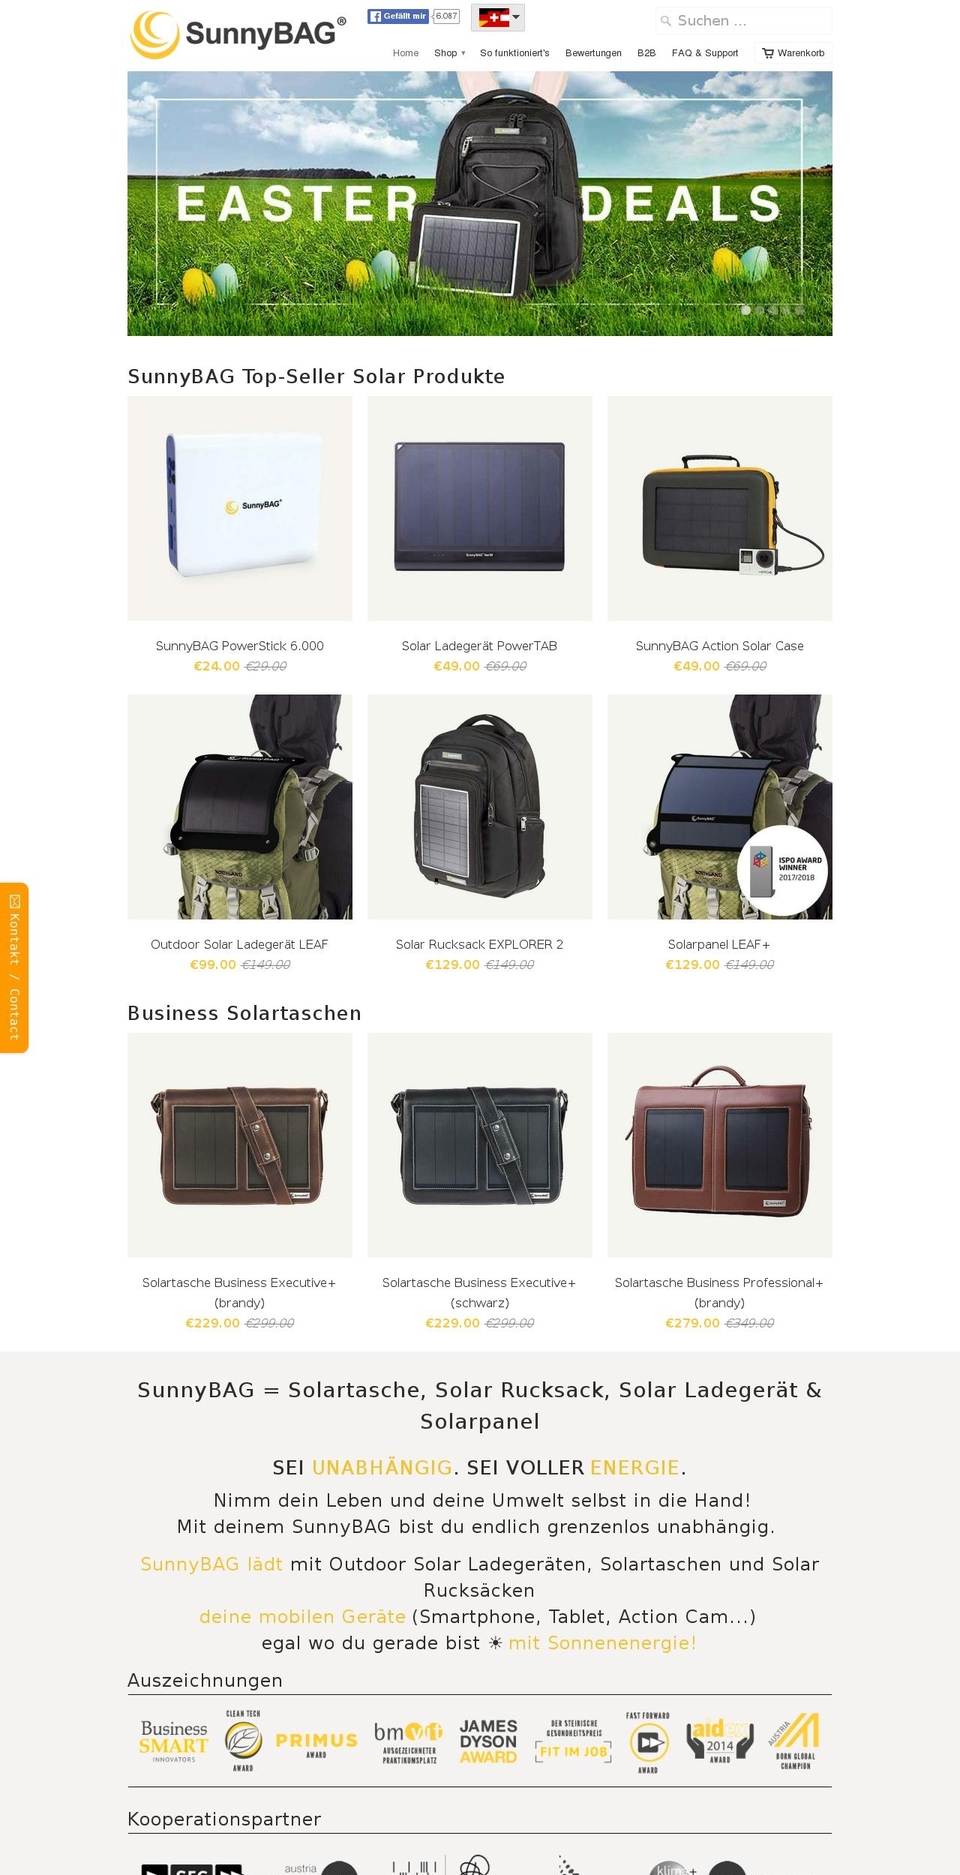 Focal Shopify theme site example sunnybag.at